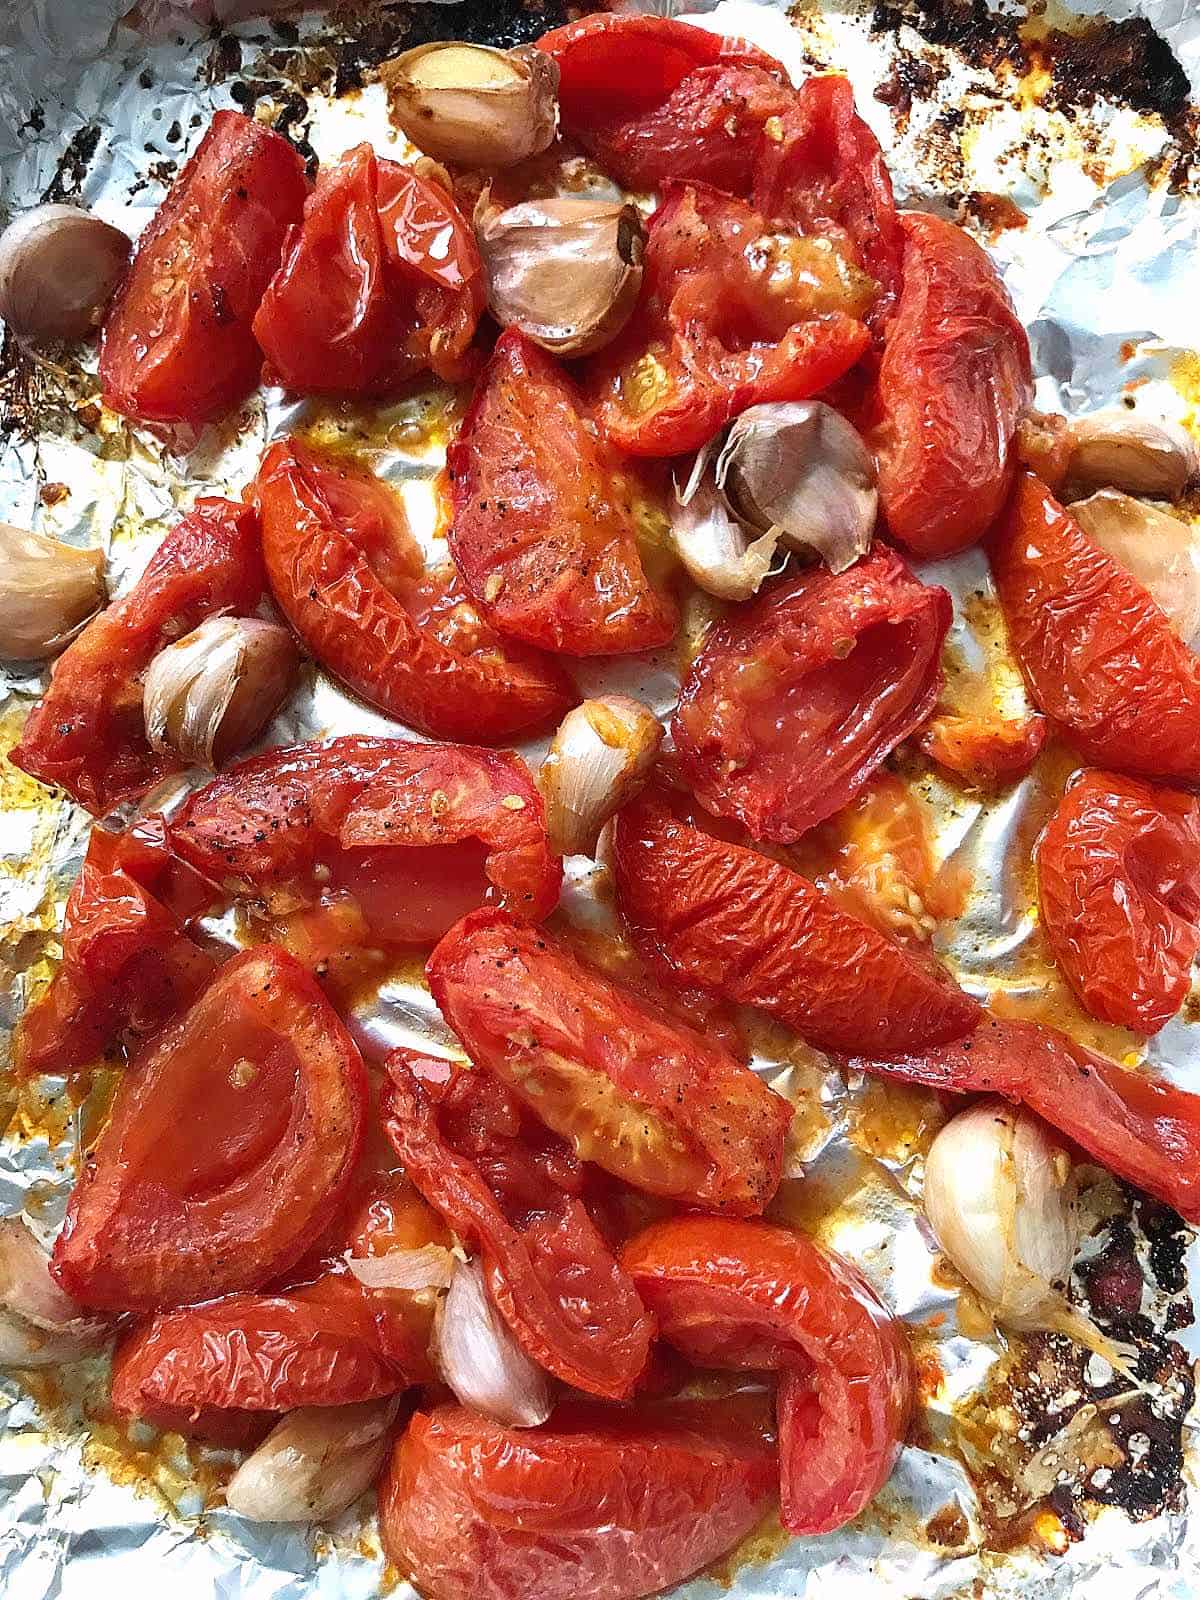 Roasted tomatoes, garlic, and red peppers on aluminum paper.